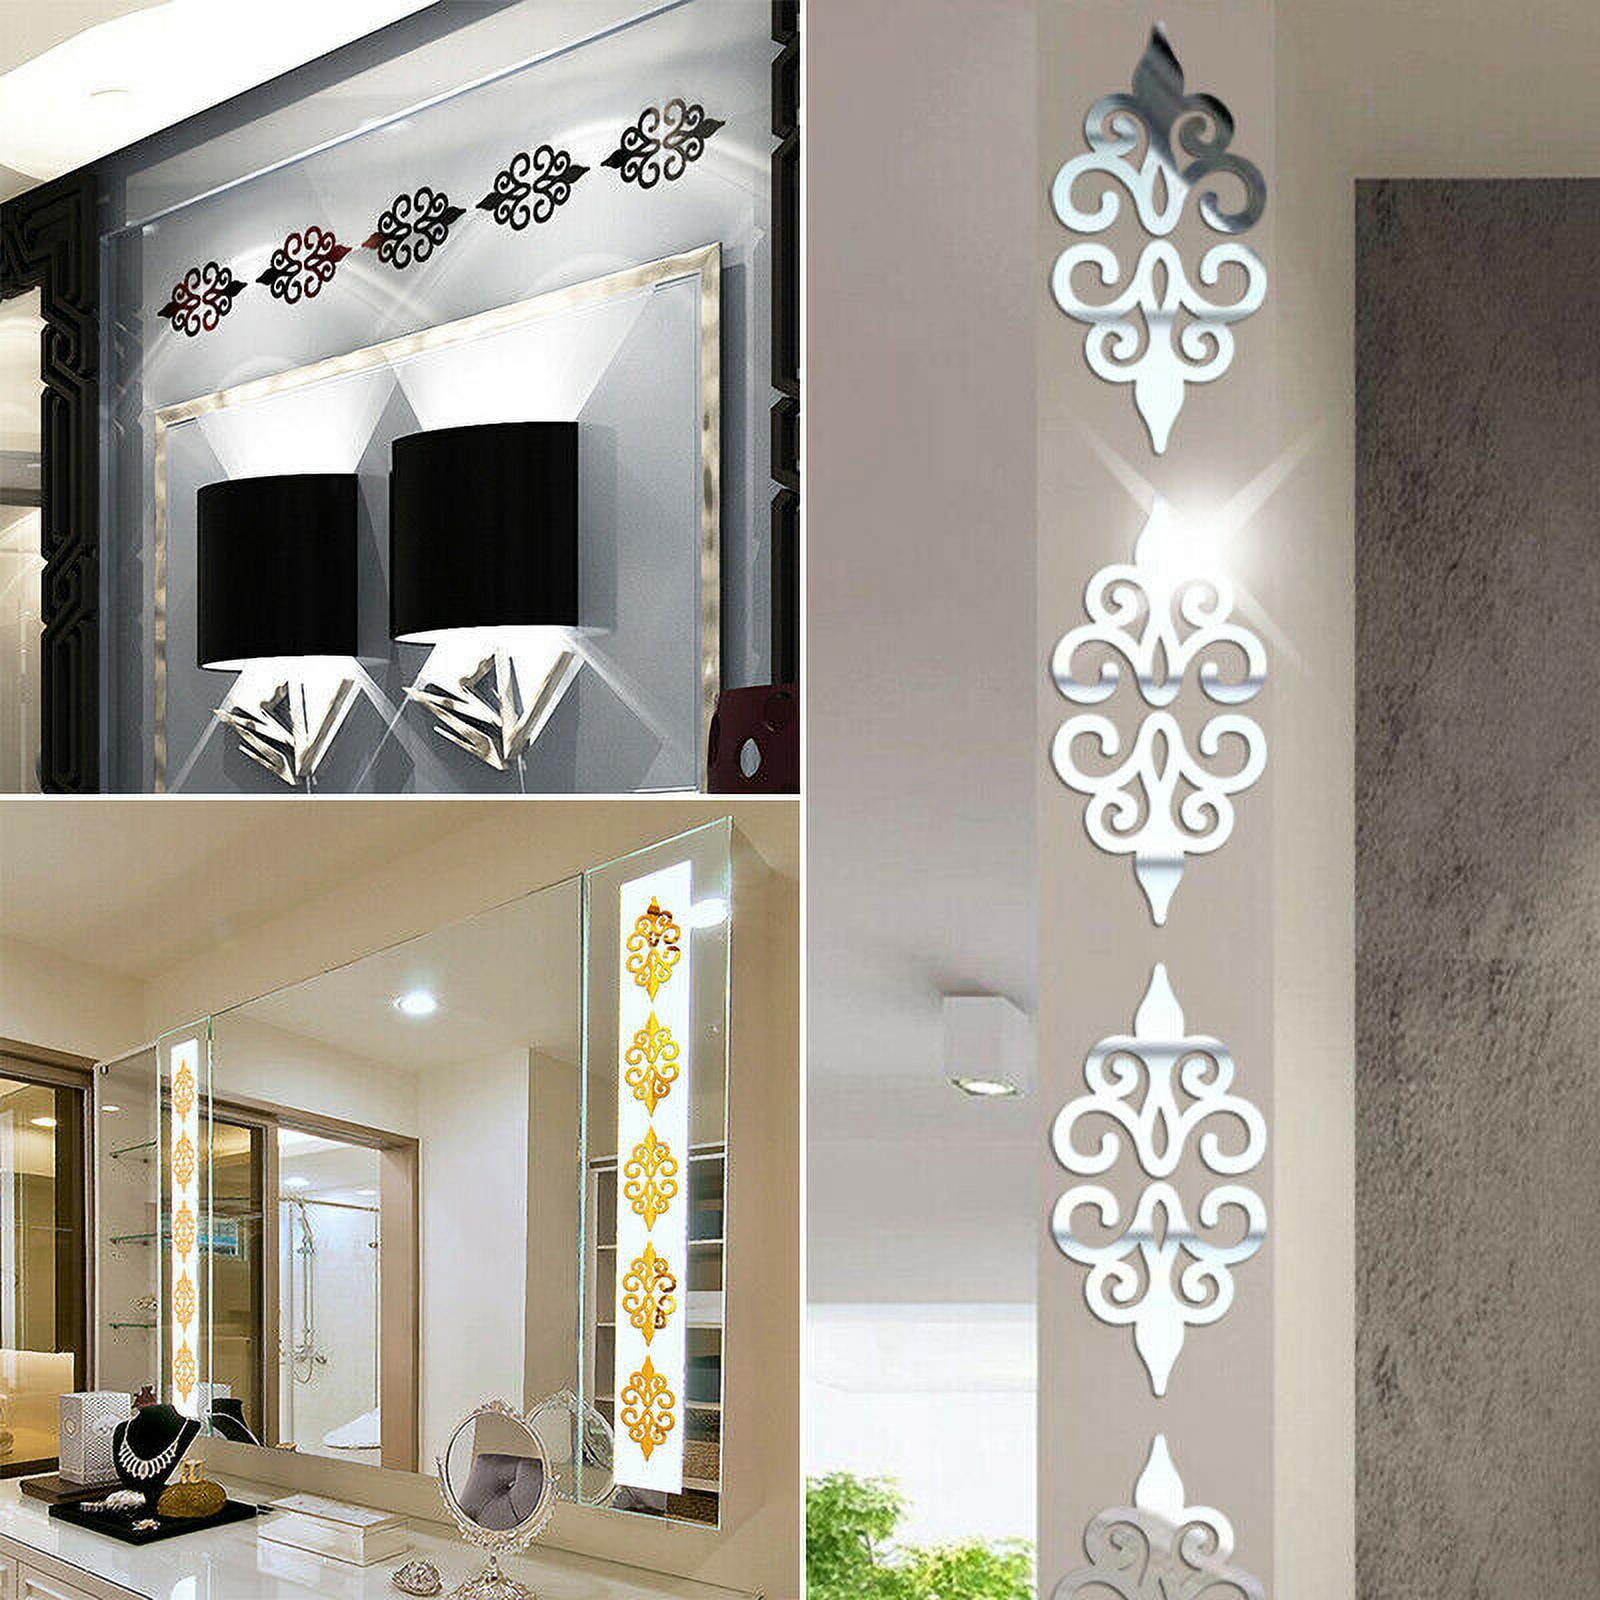 Gold Fire Modern Top Acrylic Plastic Mirrors Wall Art ROOM Decal Decor Stickers 